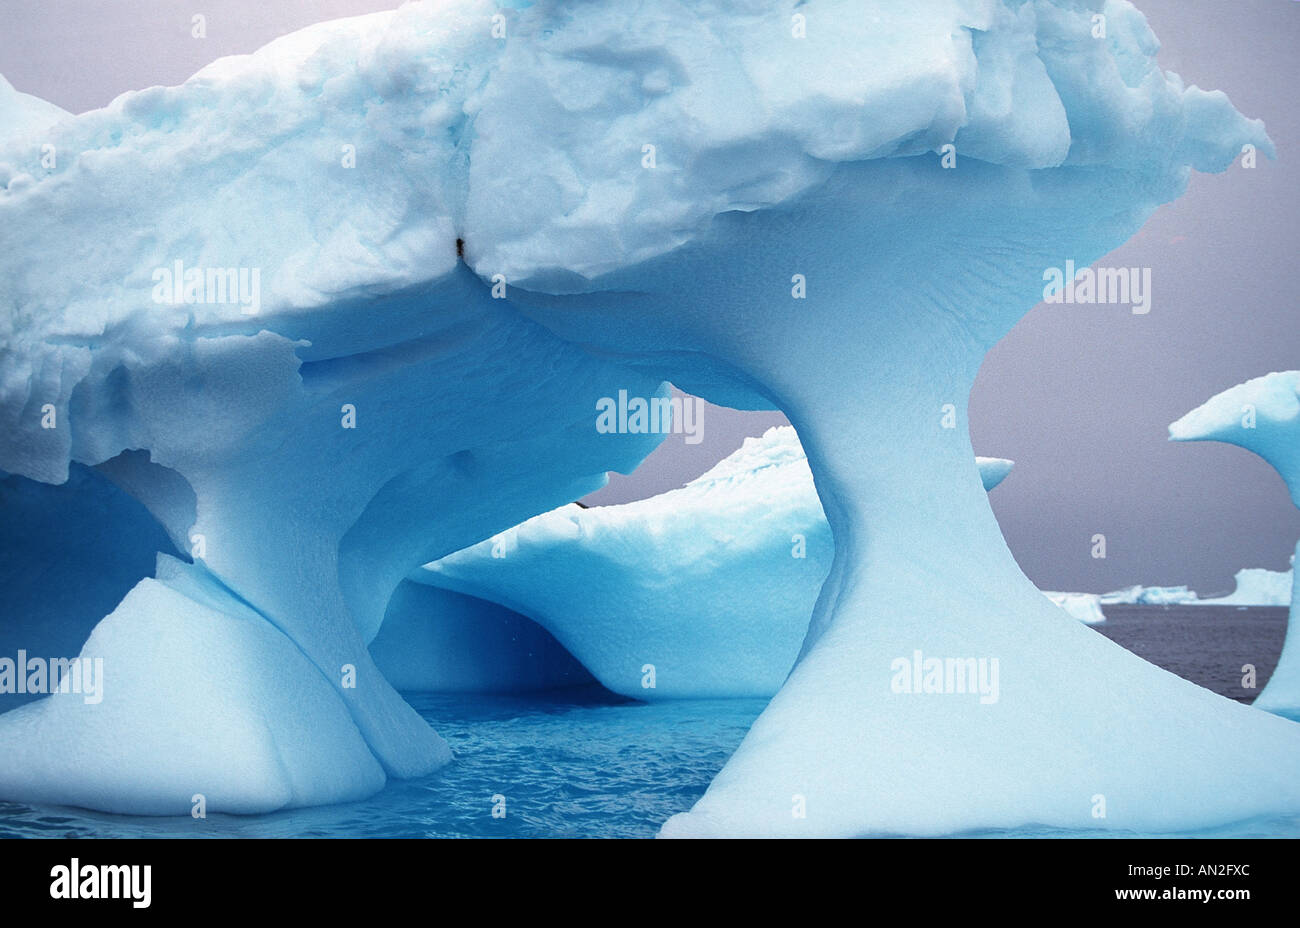 ice structures, forms of blue ice, Antarctica Stock Photo